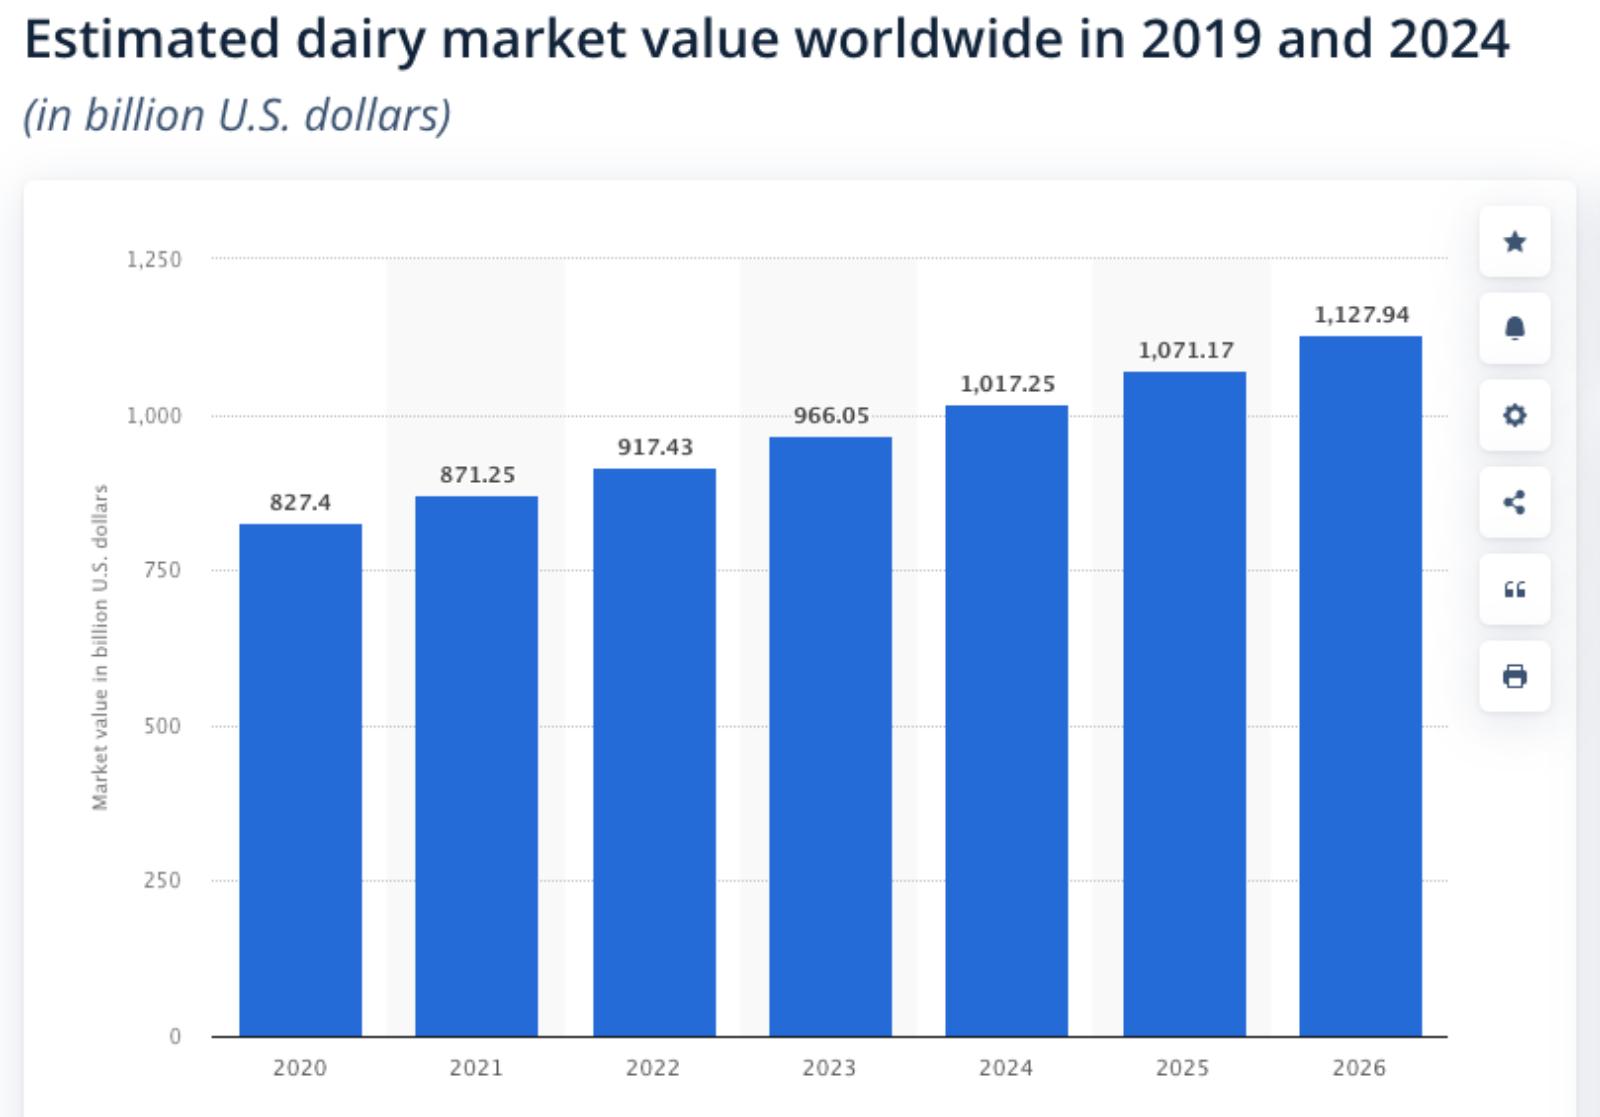 Estimated dairy market value worldwide in 2019 and 2024